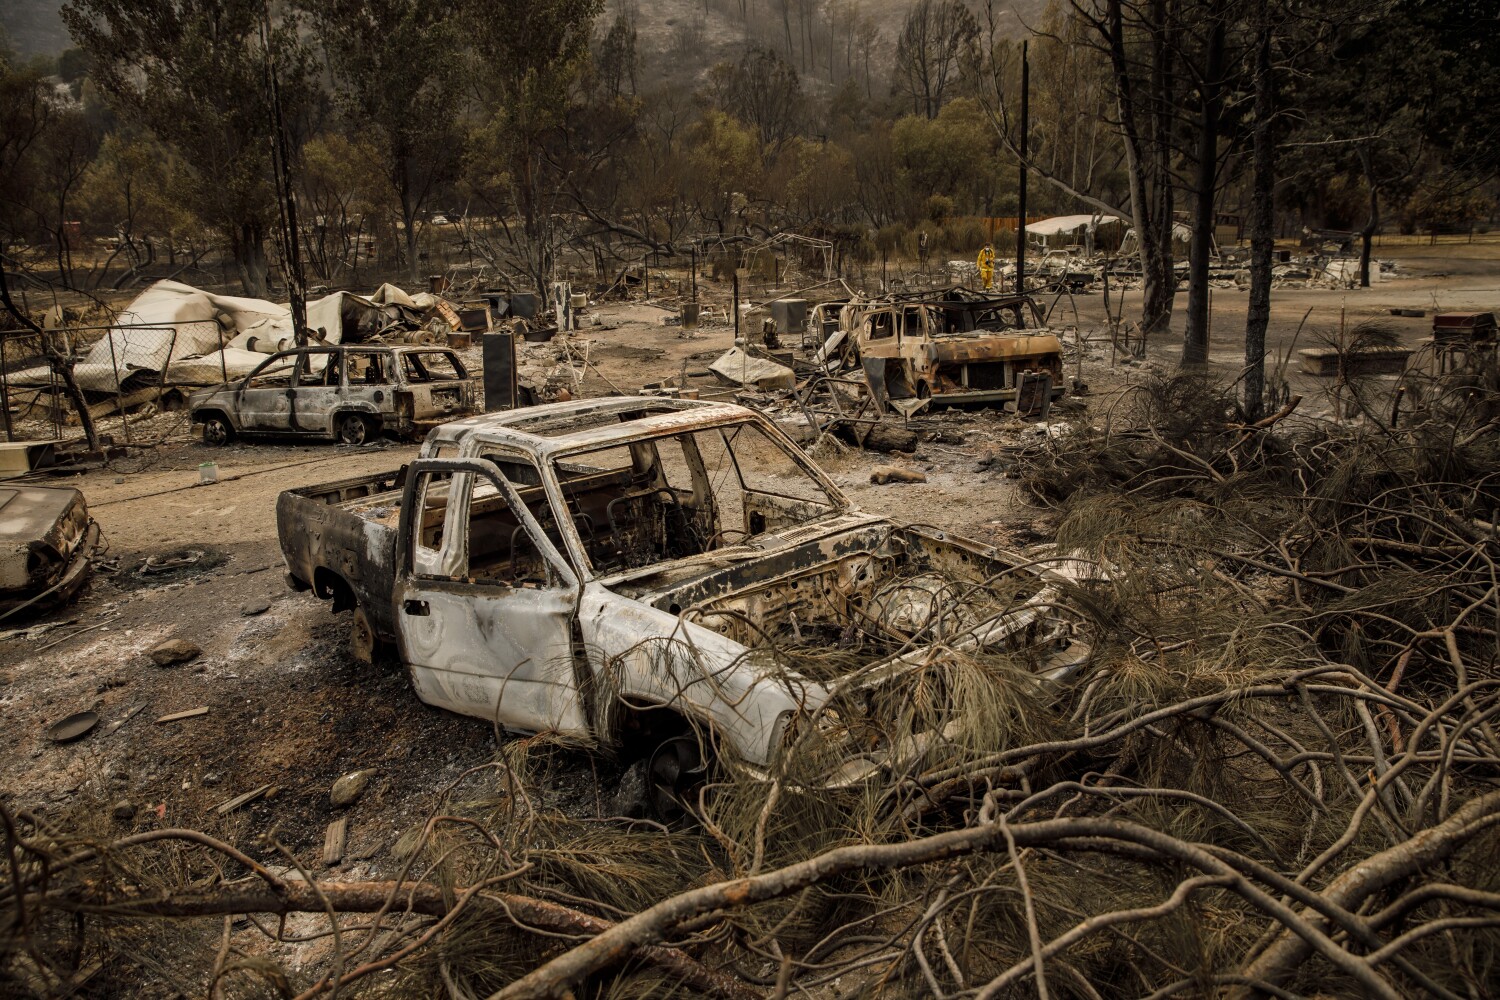 California wildfires caused by humans are more dangerous than fires sparked by lightning